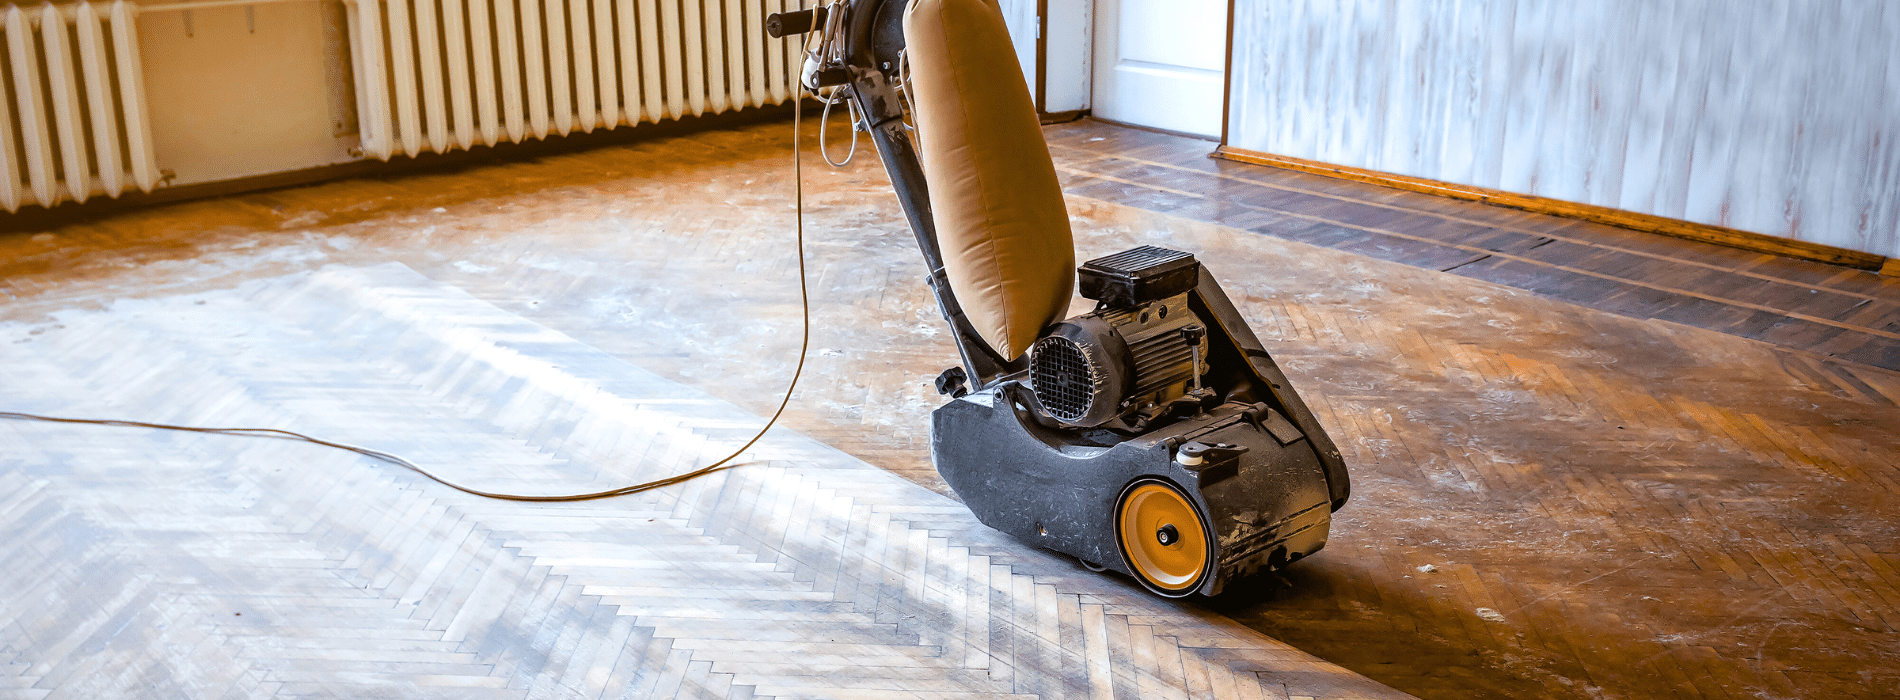 In Gants Hill, IG2, experience the expertise of Mr Sander® as they skillfully sand a herringbone floor using a Voltage 230 Frequency 5060 Bona belt sander. With a dust extraction system and HEPA filter, they ensure a clean and efficient result.